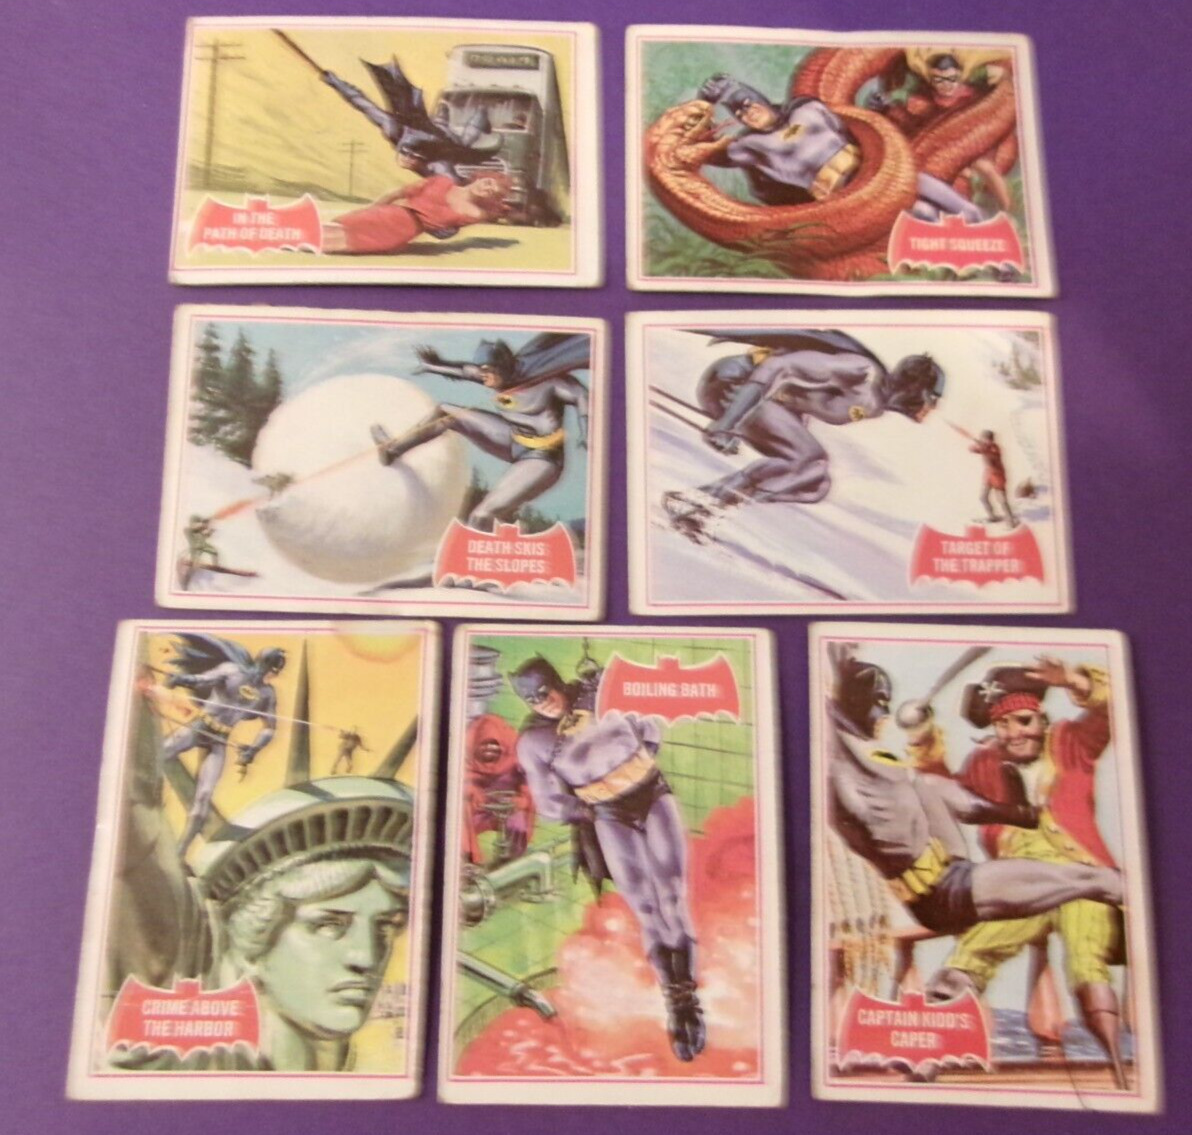 7 TOPPS 1966 BATMAN RED SERIES TRADING CARDS TV ACTION COMEDY COMIC BOOK HEROES